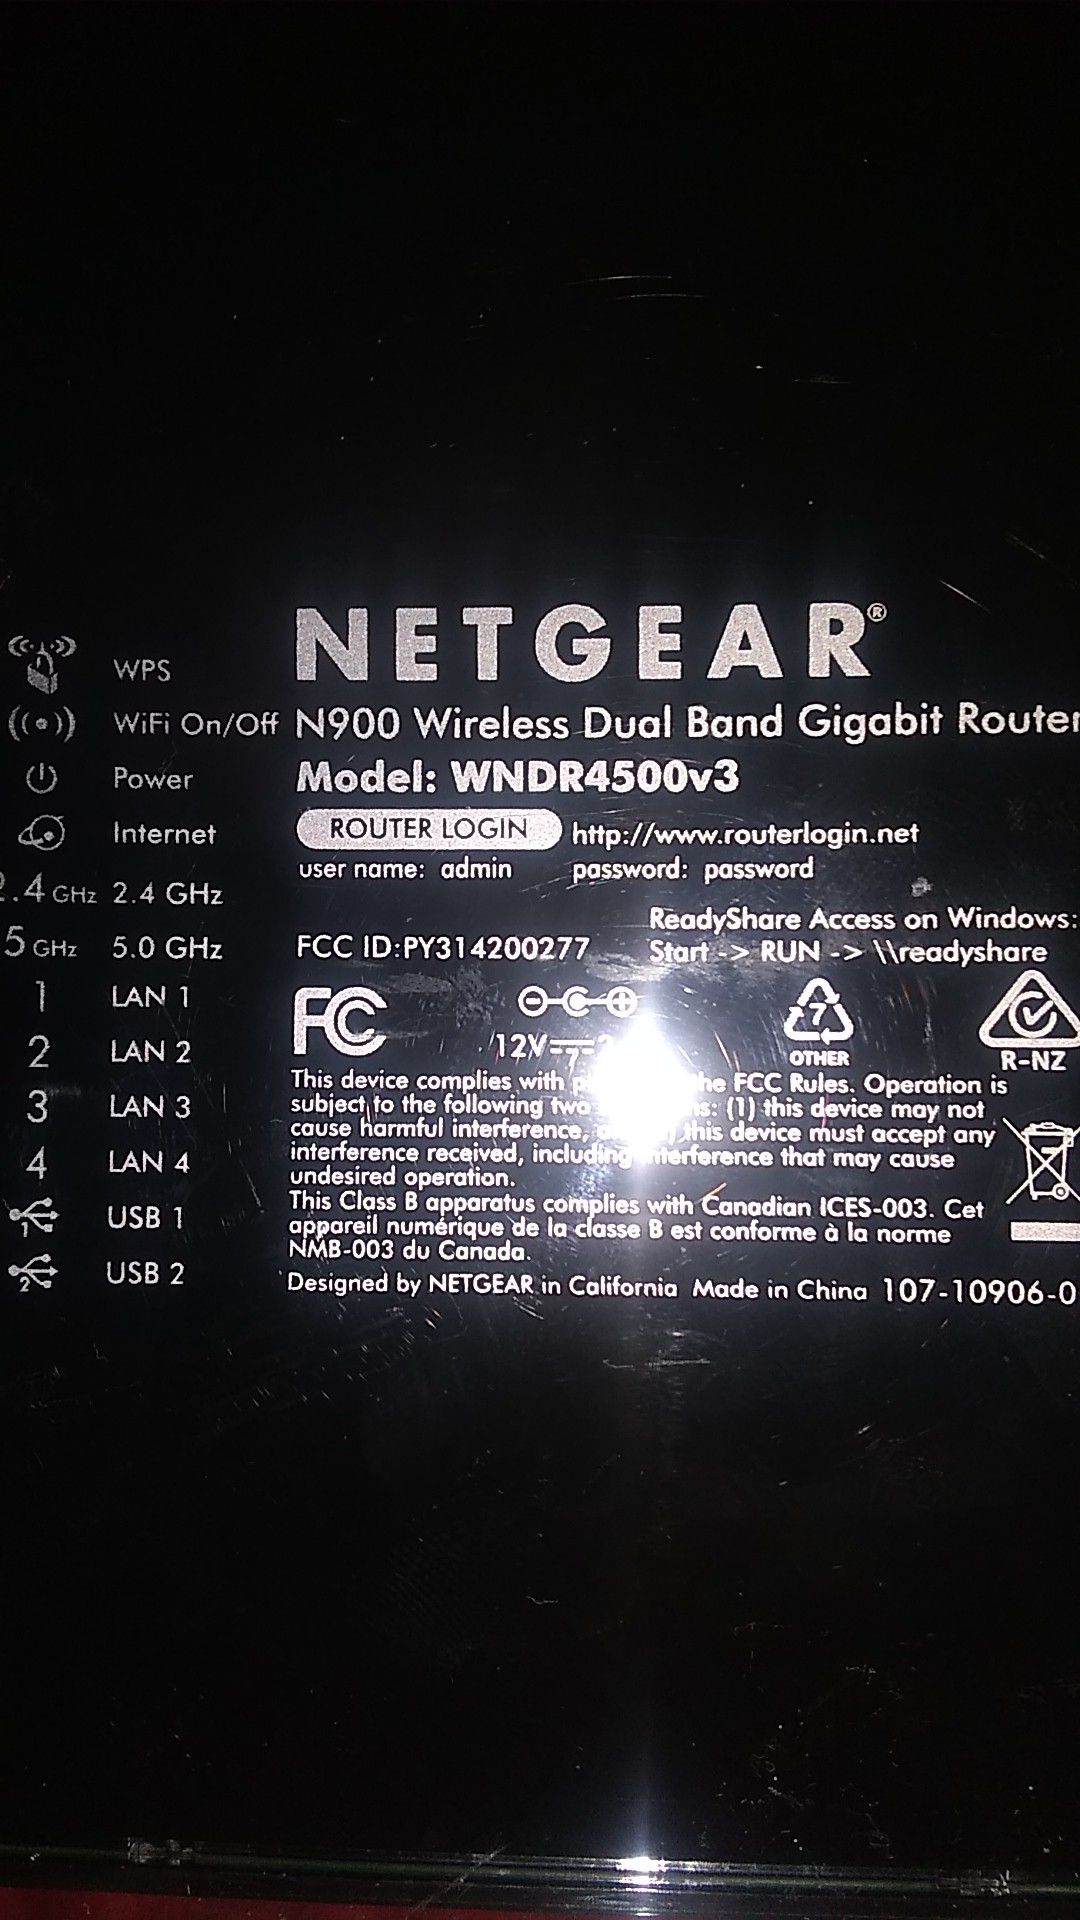 The NETGEAR N900 v3 Wireless Dual Band Gigabit Router delivers the ultimate in WiFi performance and range.